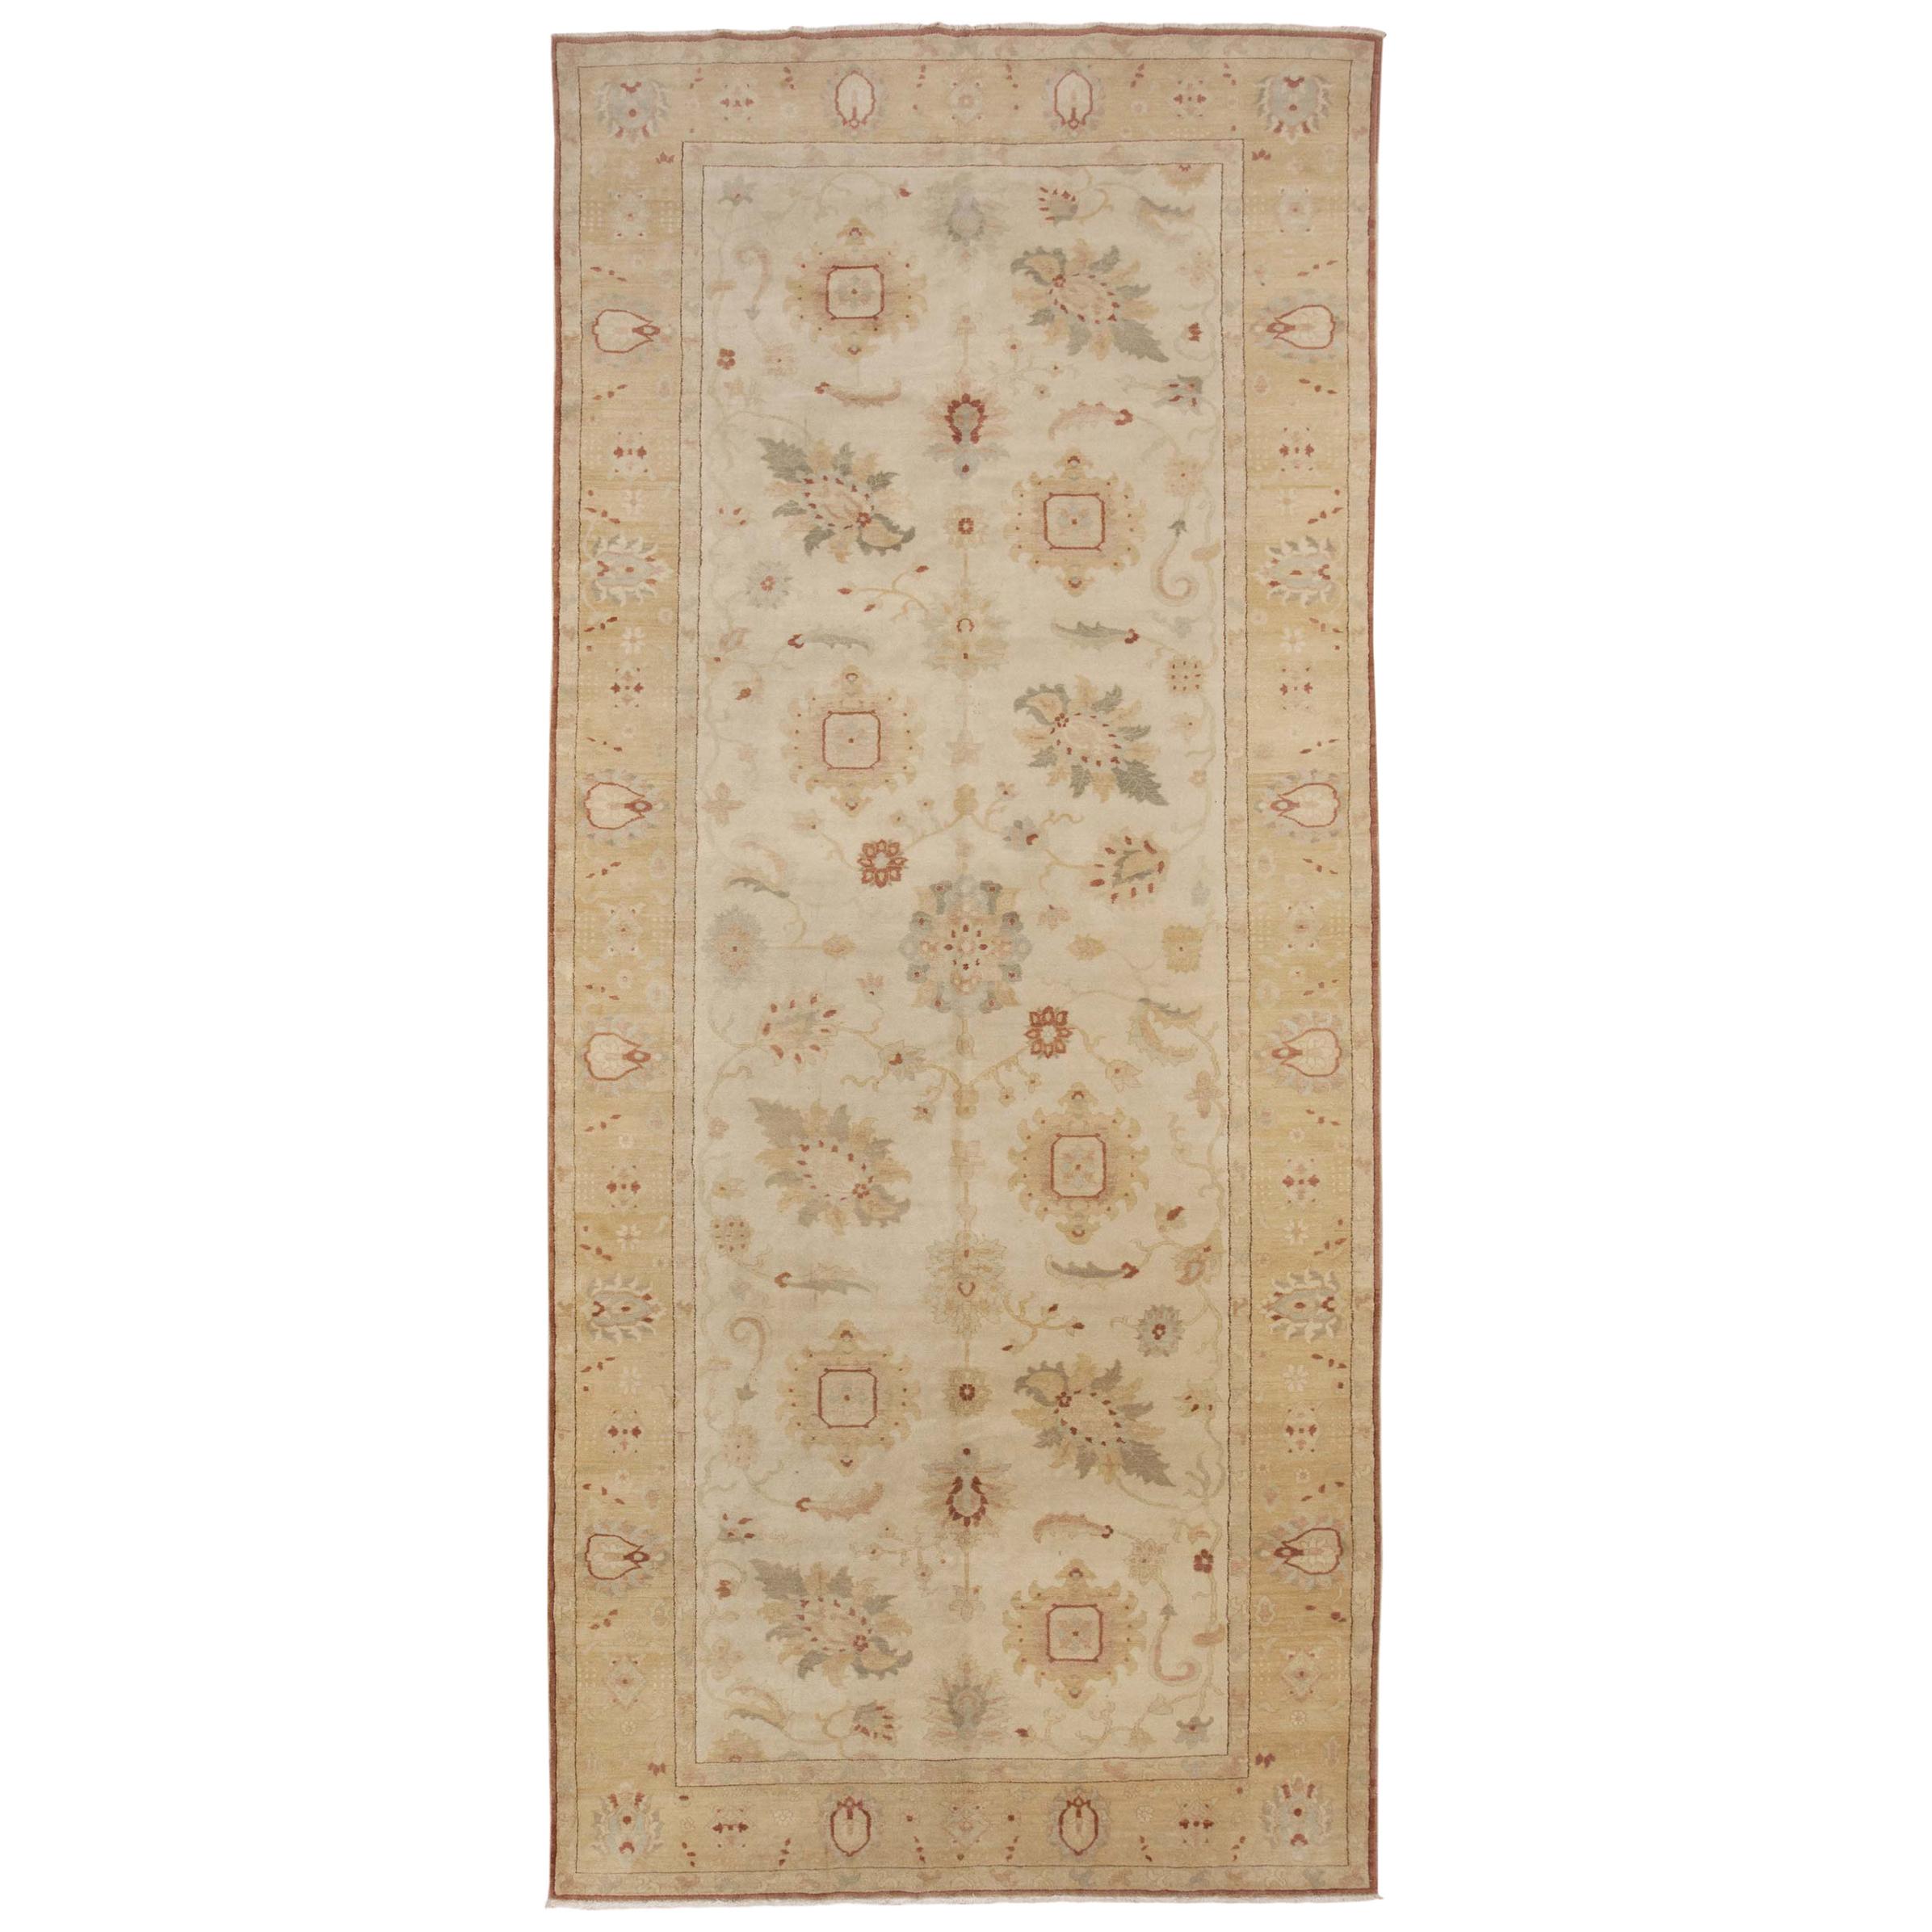 Sultanabad Wide Hallway Runner Rug. Size: 7 ft x 16 ft 4 in  For Sale